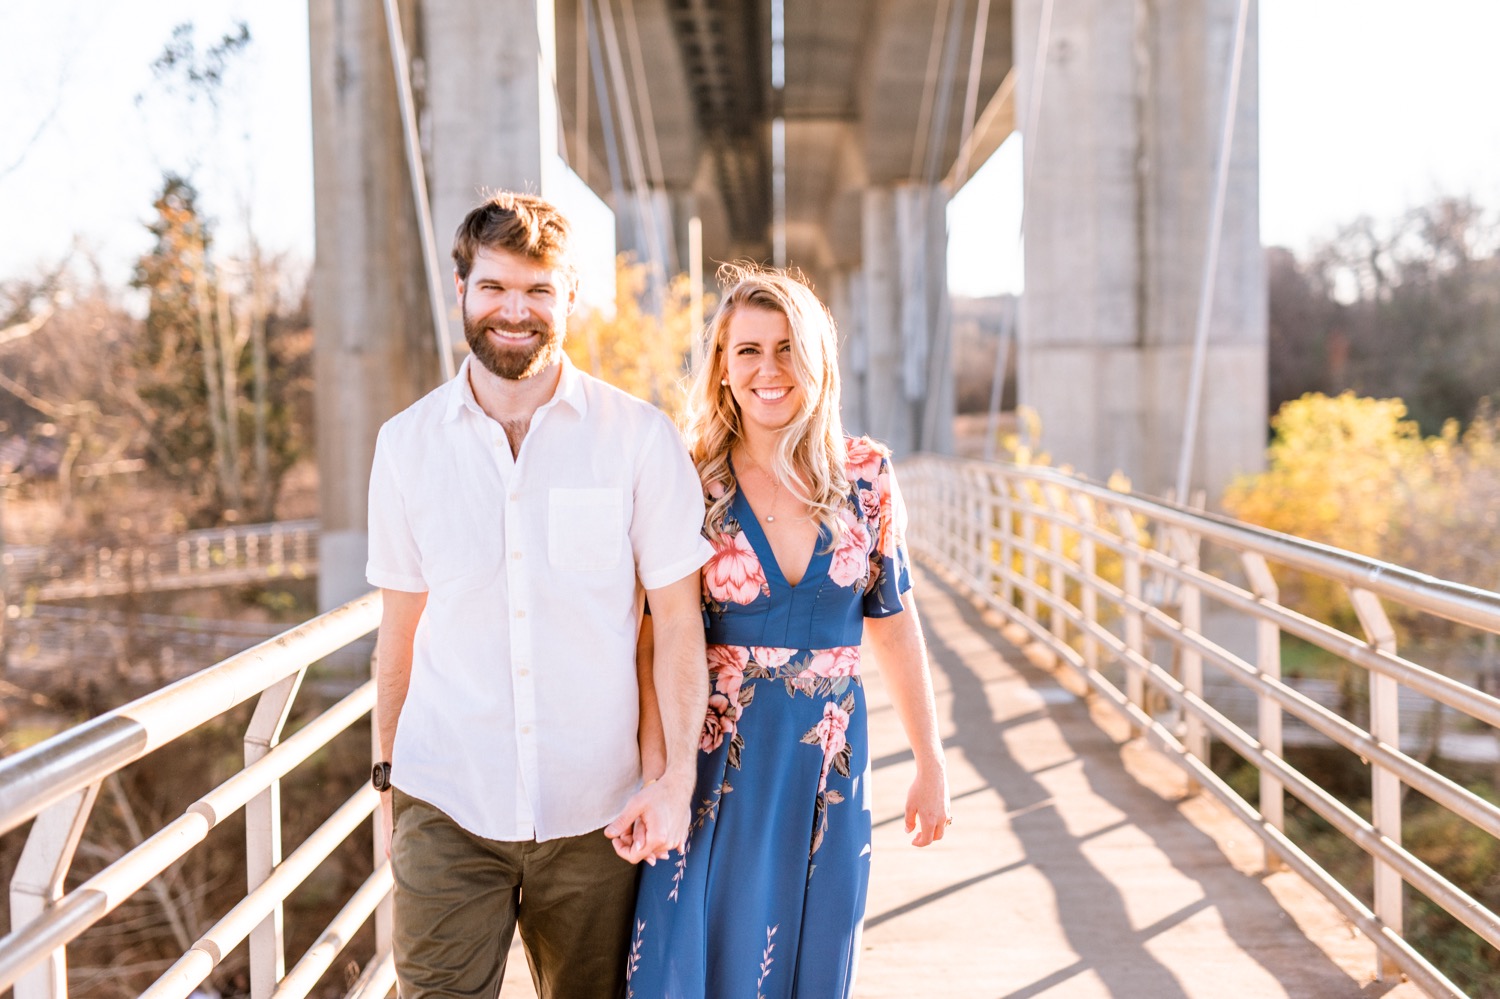 couple showcase love during engagement photoshoot in Belle Isle